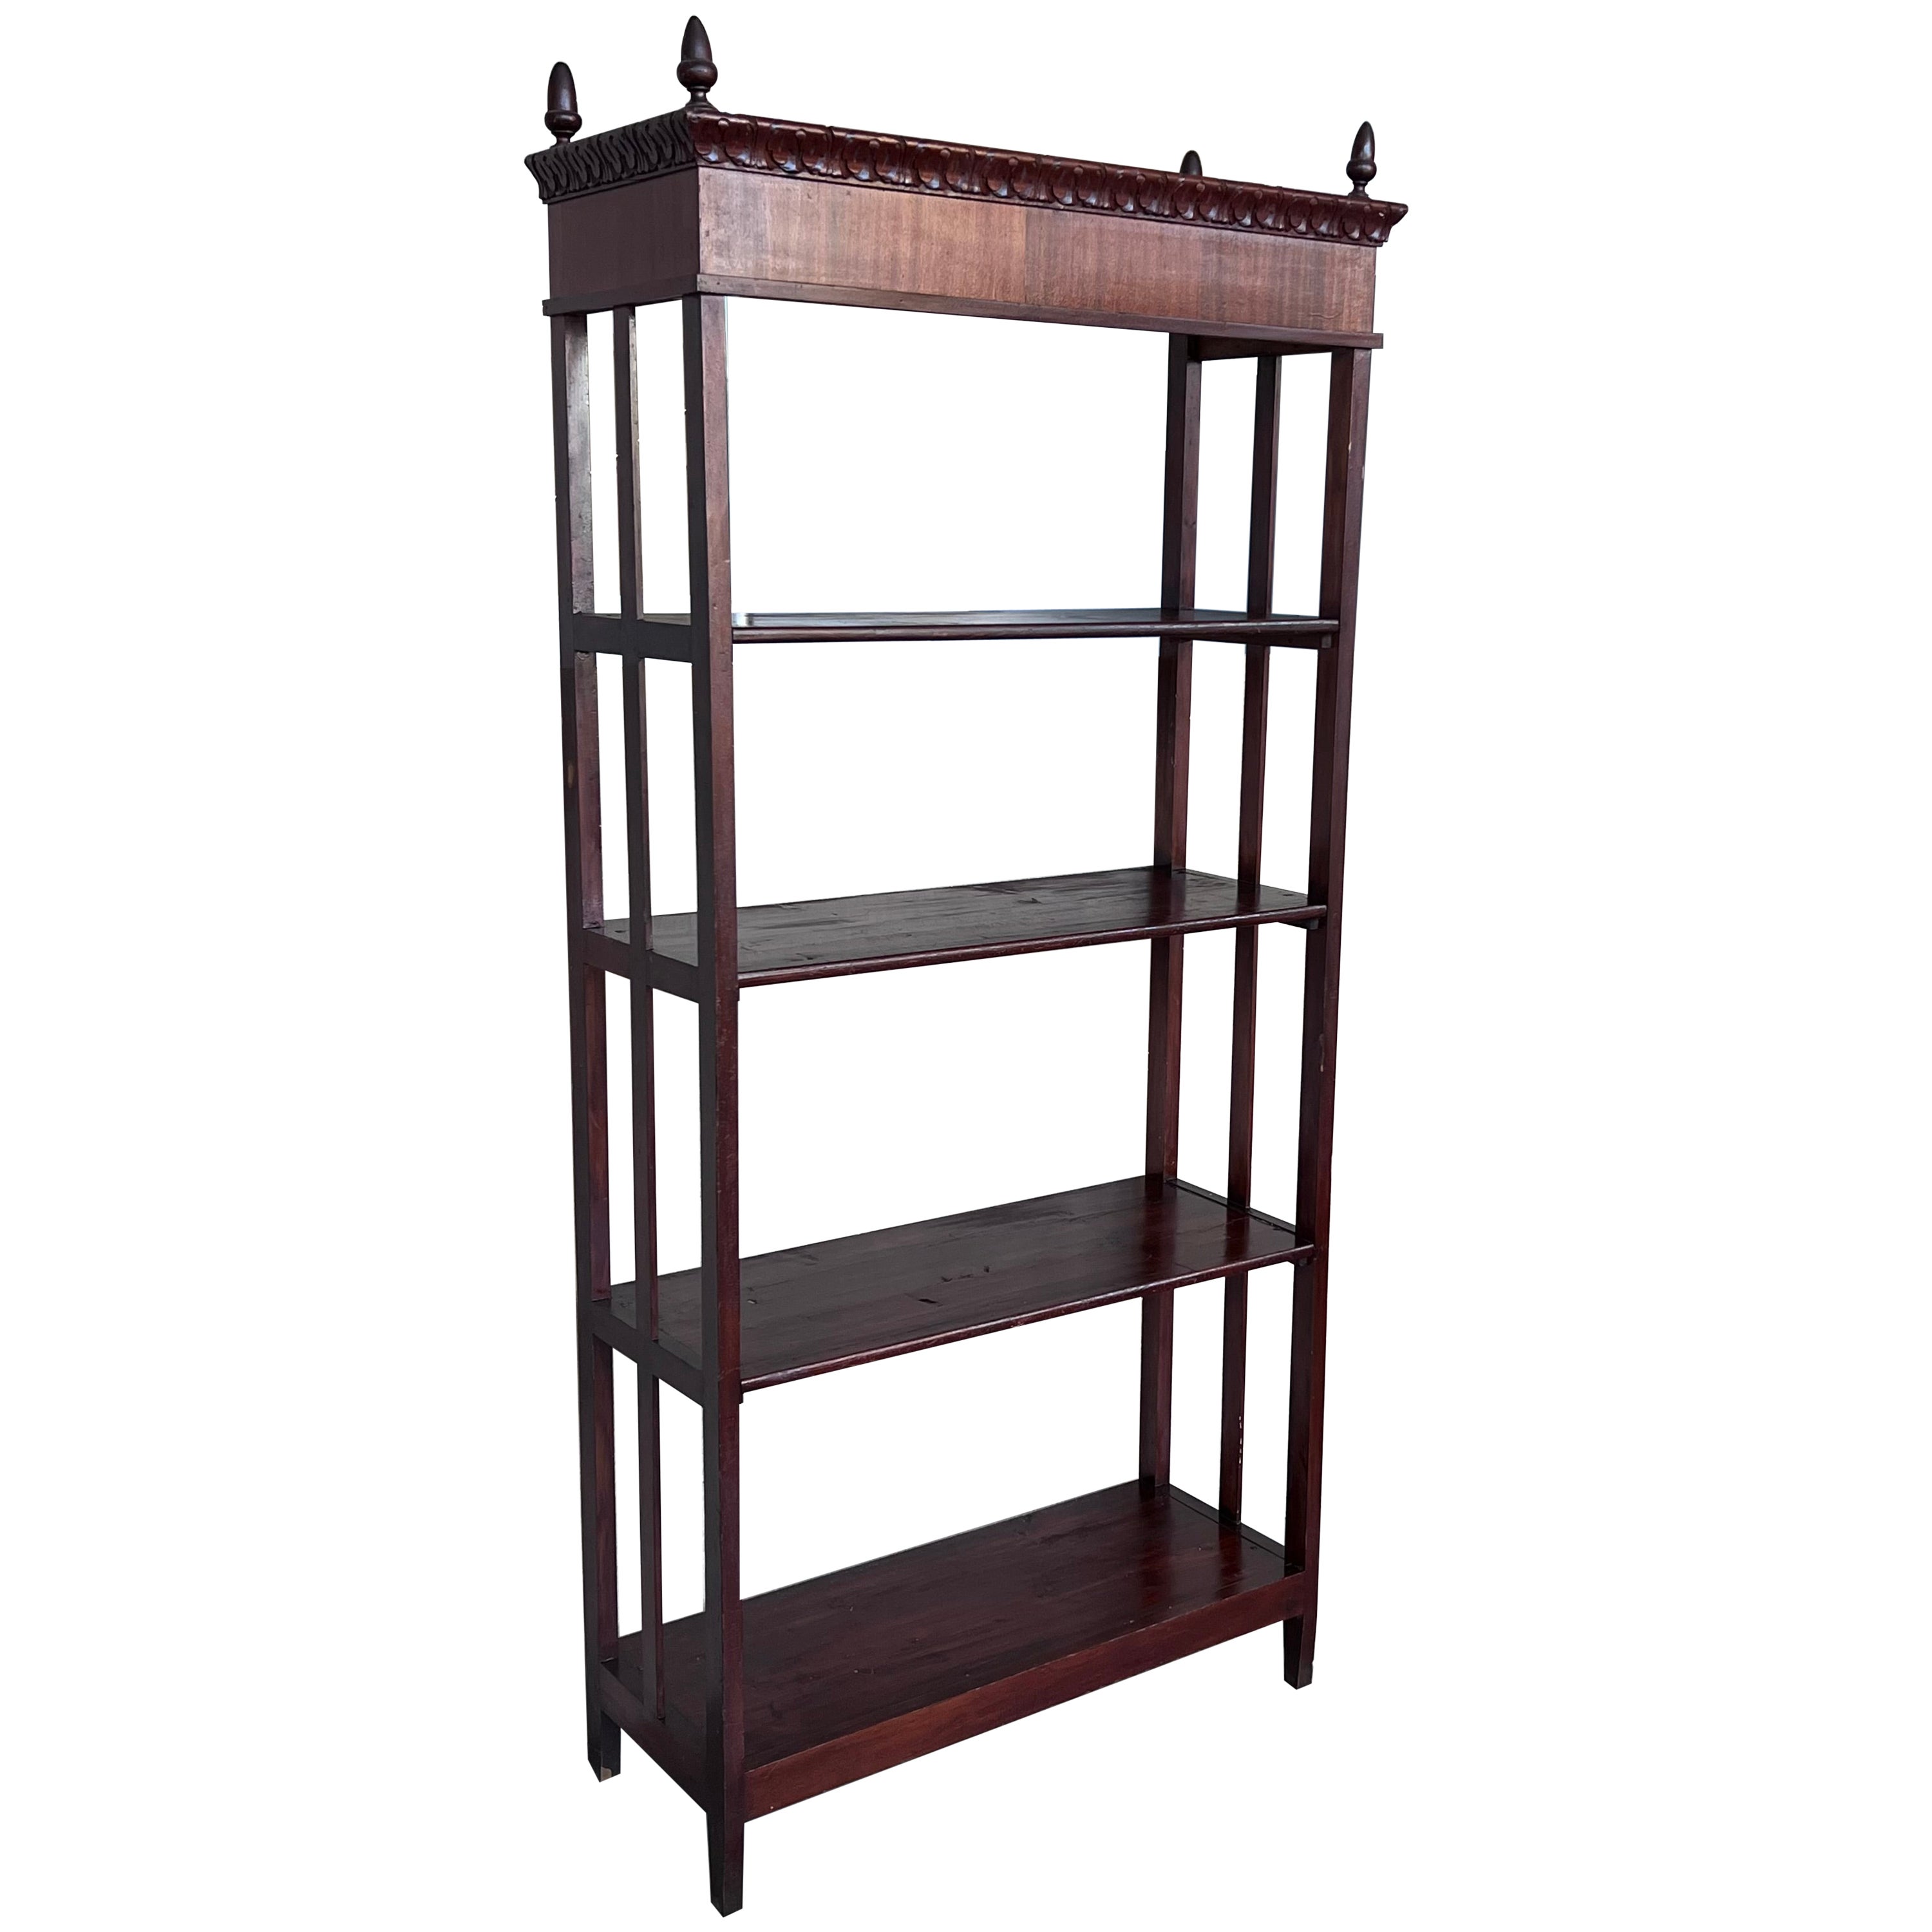 Late 19th Century French Empire Style Walnut Four Shelves Etagere For Sale